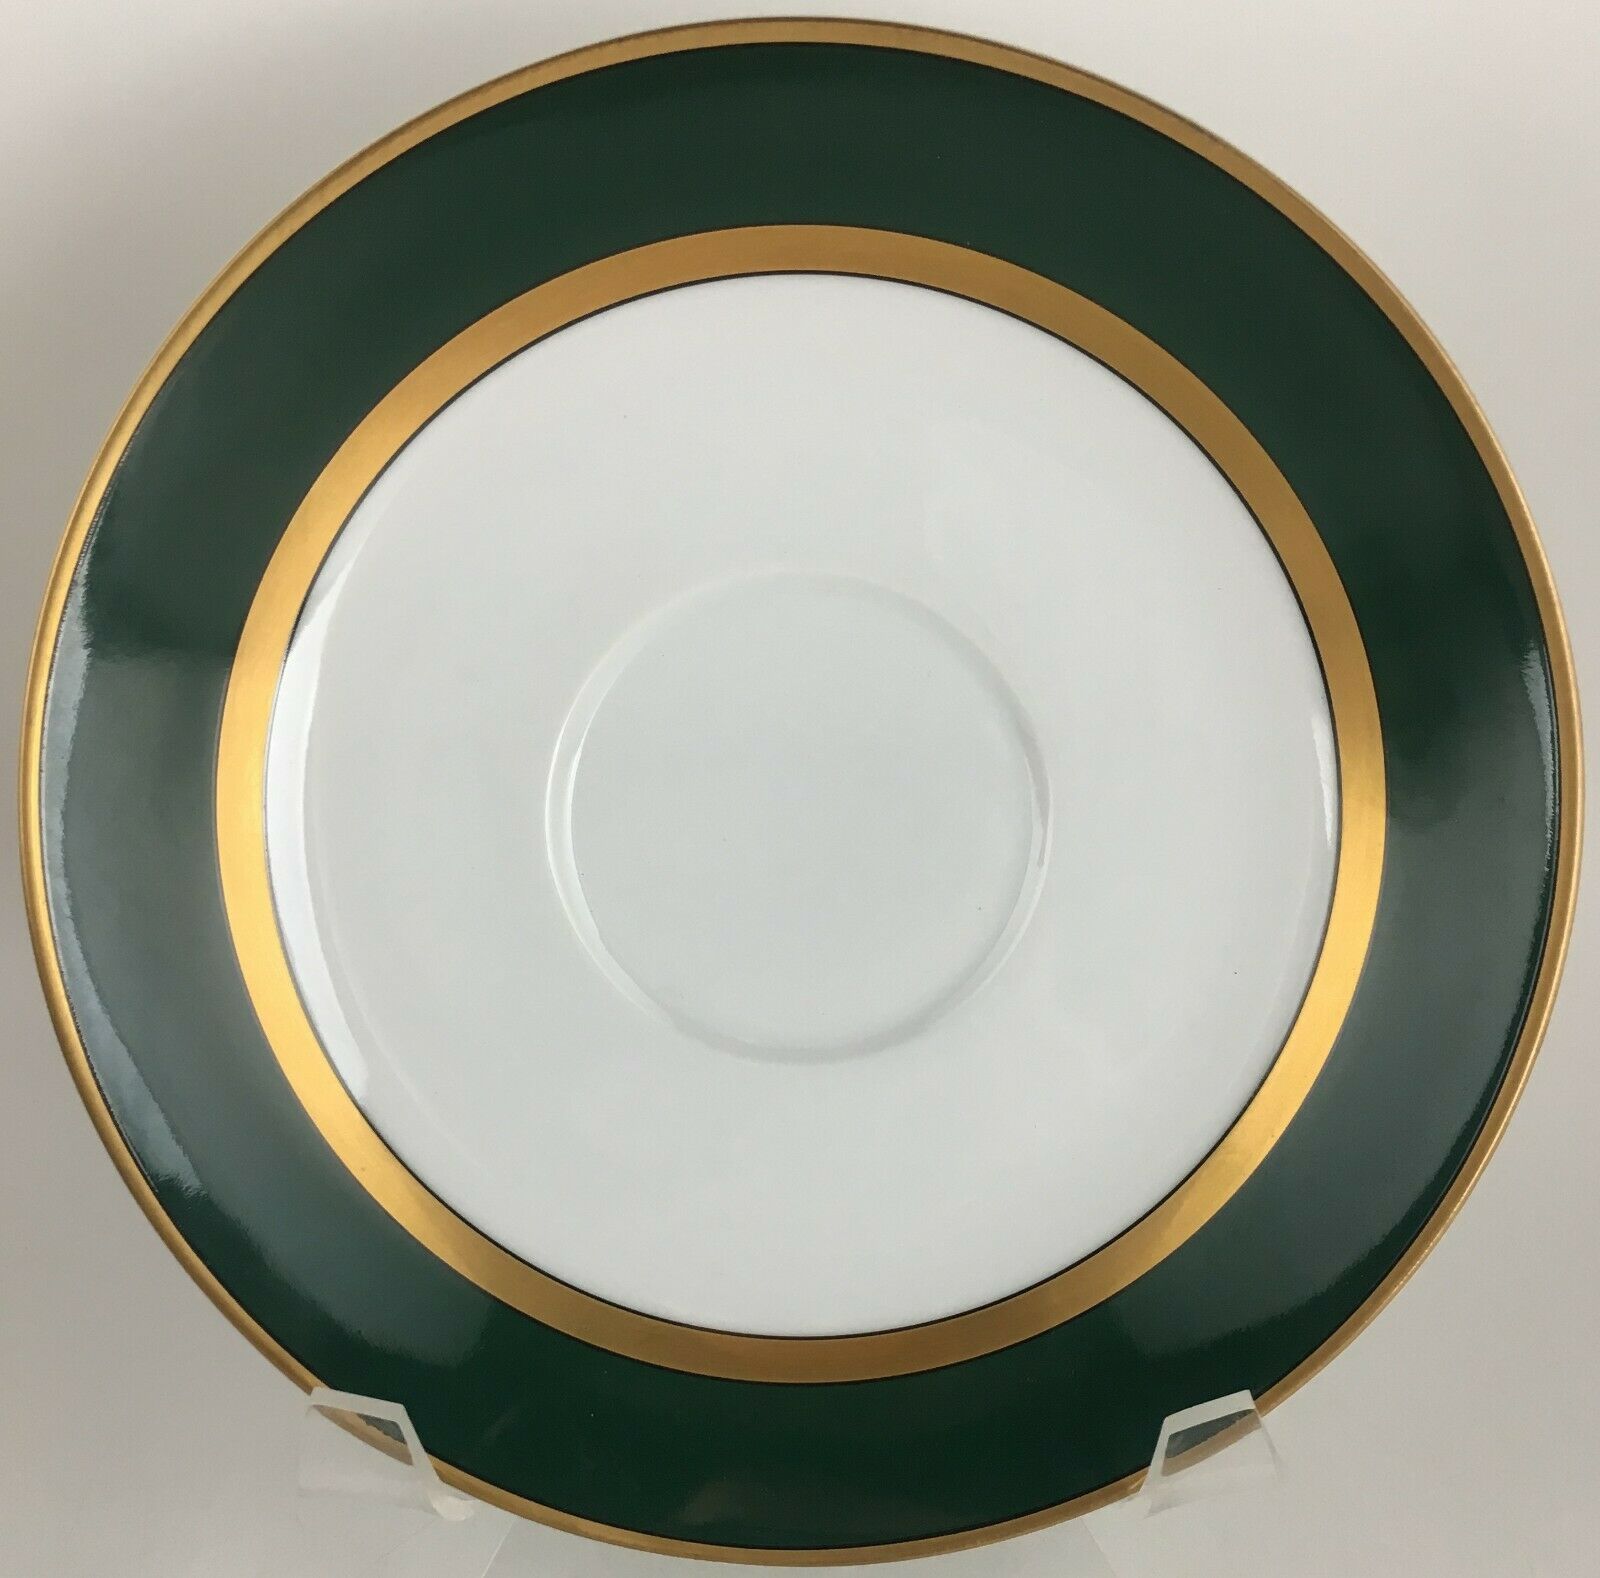 Primary image for Fitz & Floyd Renaissance Dark Green Saucer ( for cream soup bowl ) 